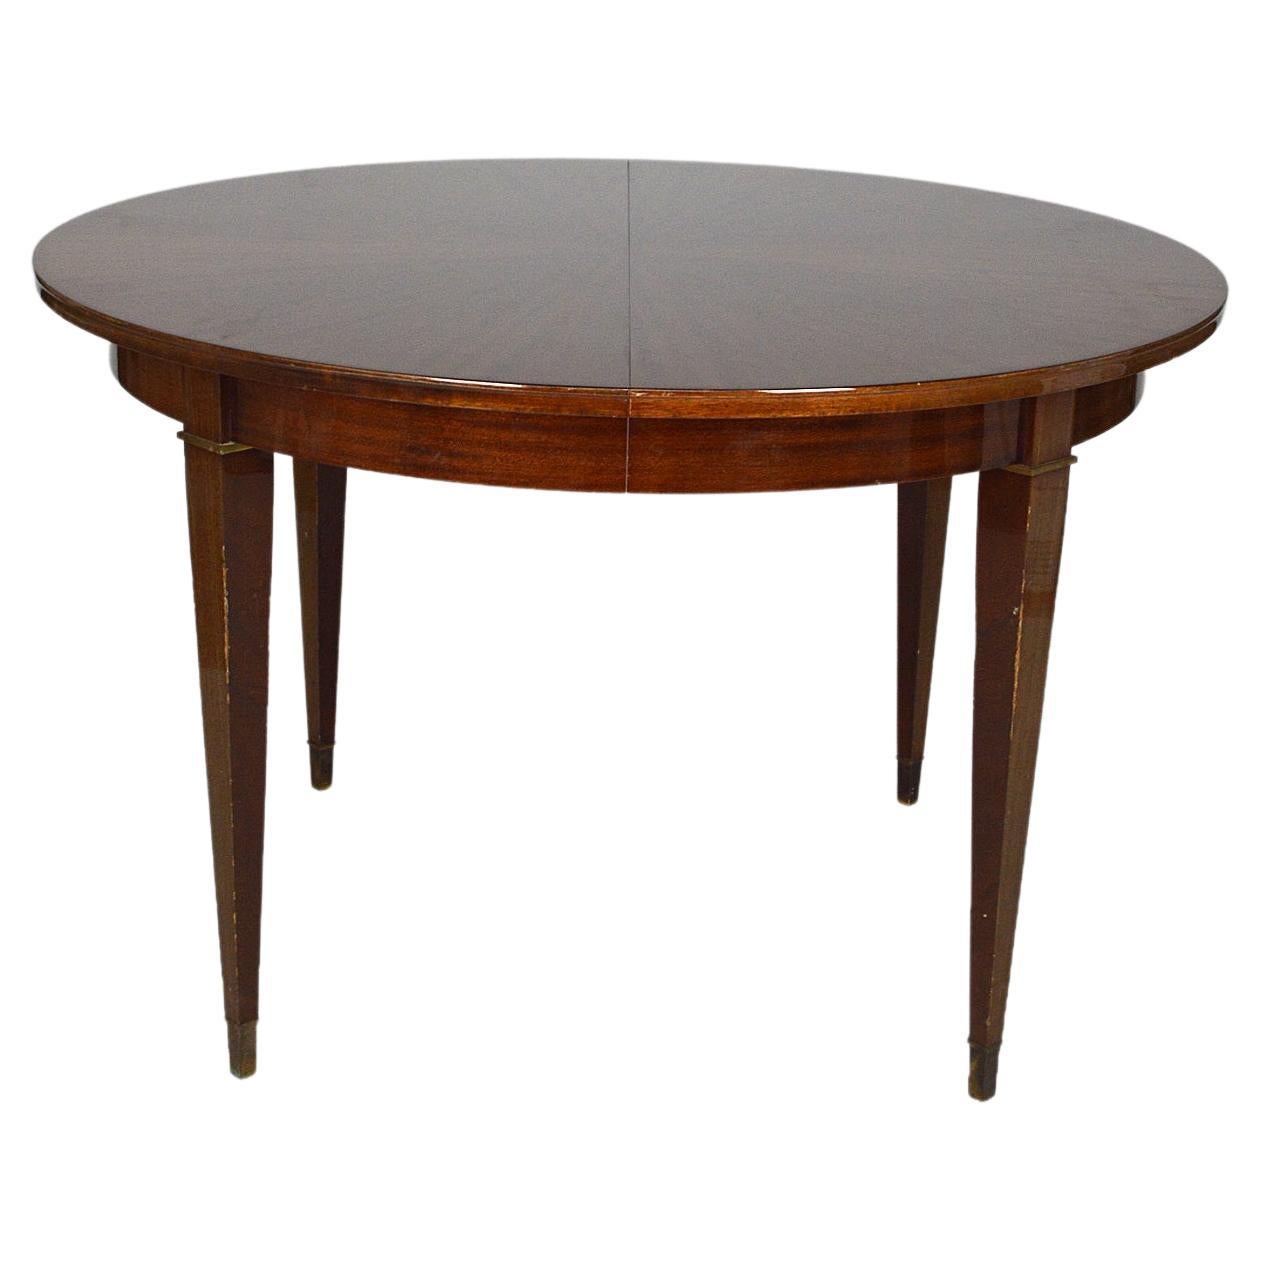 Art Deco Extendable Round Table in Mahogany, by Jacques Adnet, circa 1940 For Sale